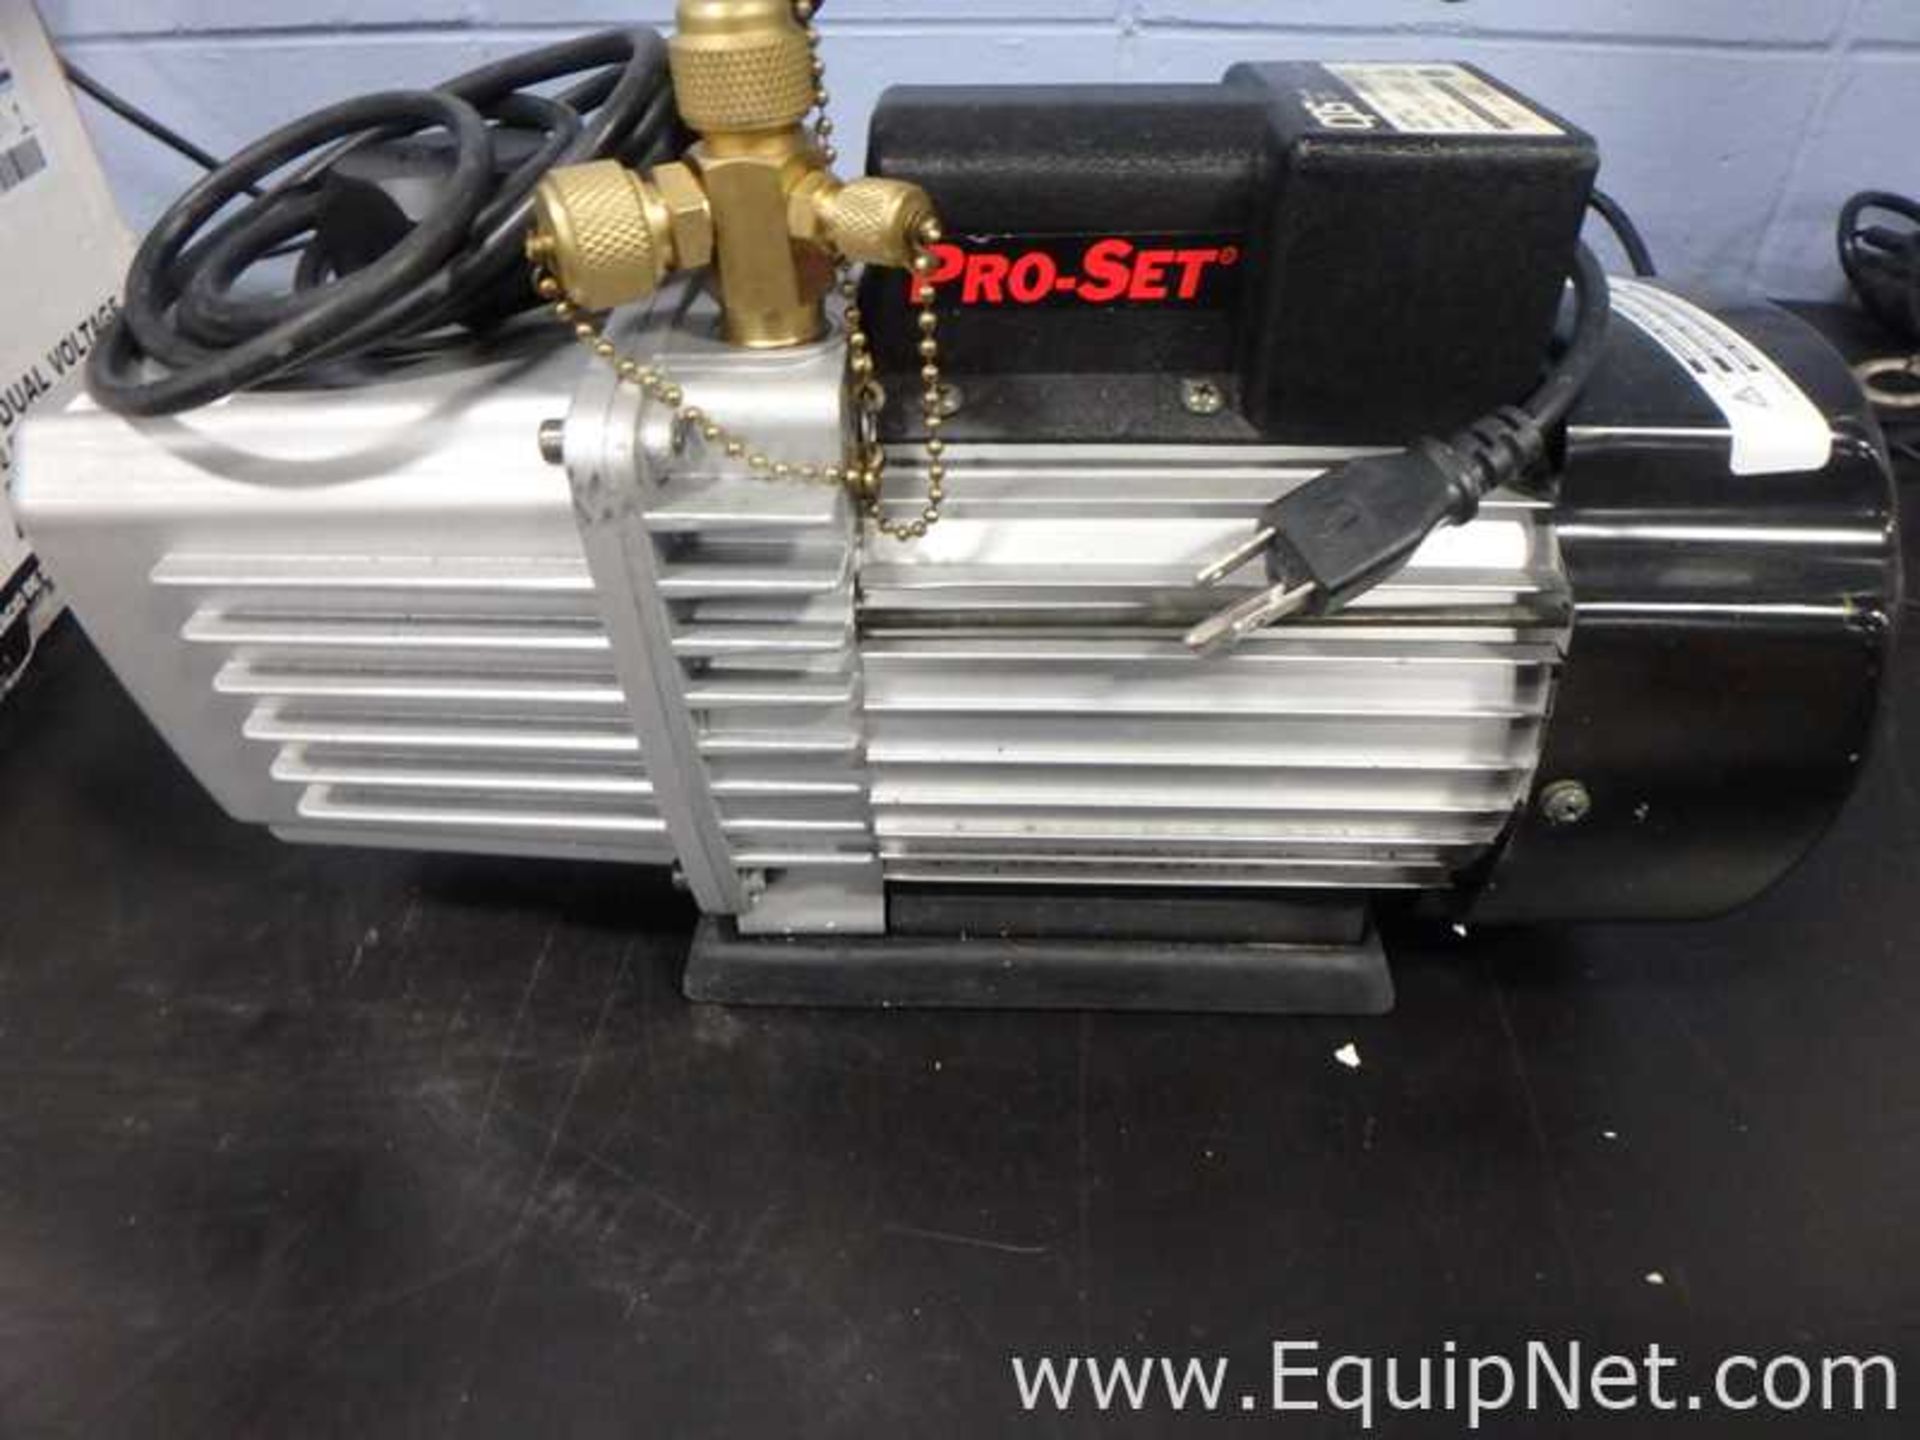 EQUIPNET LISTING #834833; REMOVAL COST: $10; MODEL: VP8D; DESCRIPTION: CPS VP8D Two Stage Vacuum